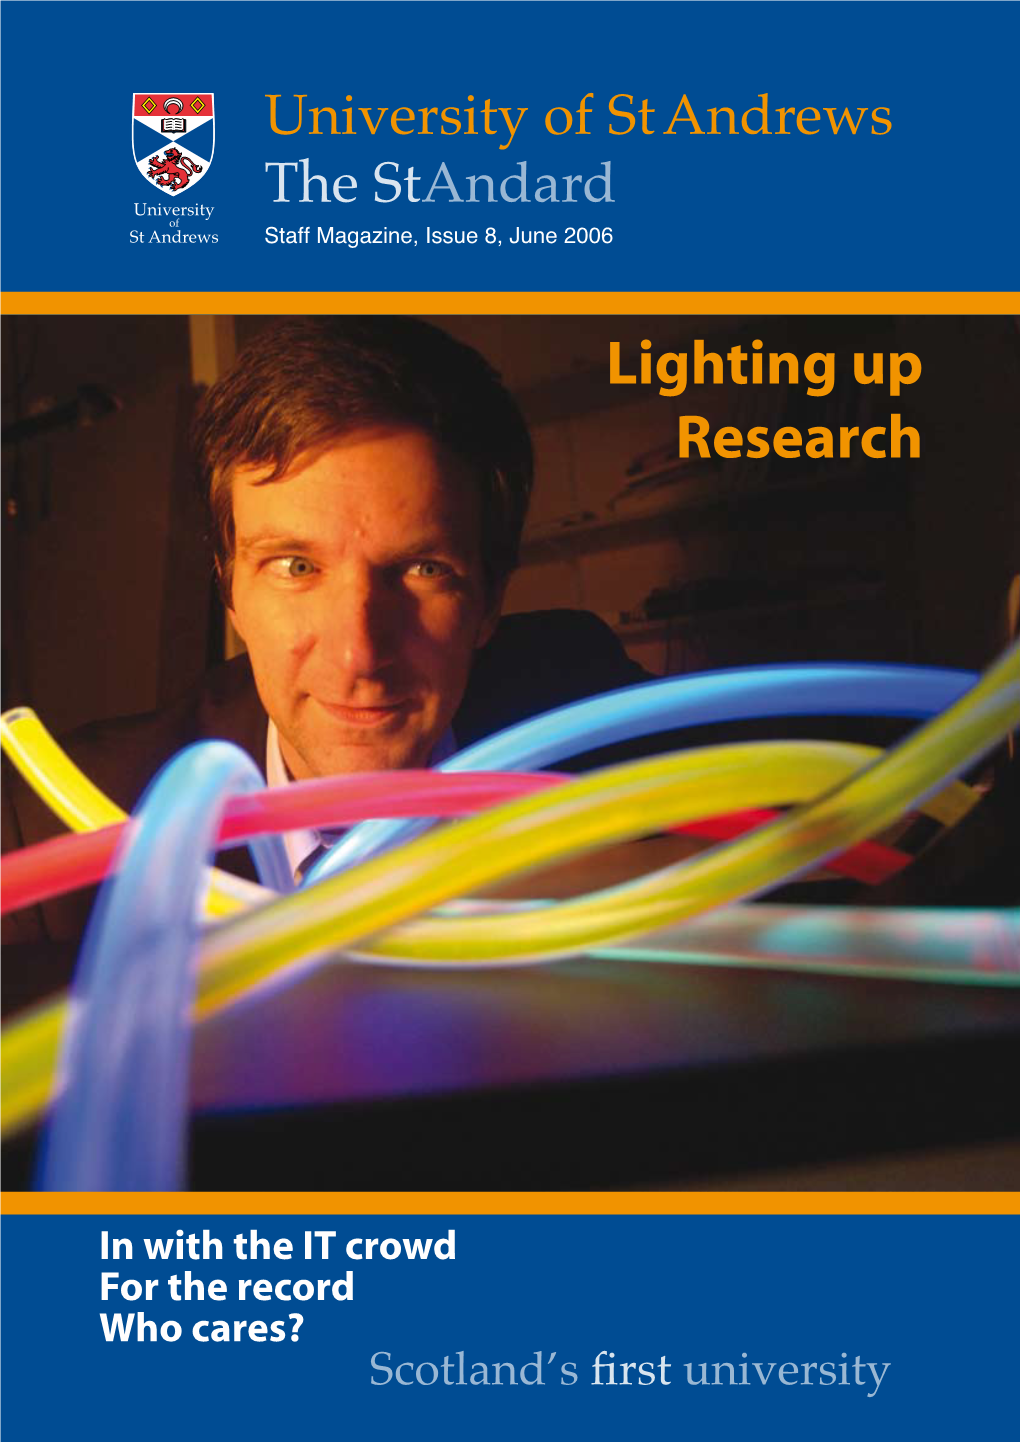 Lighting up Research